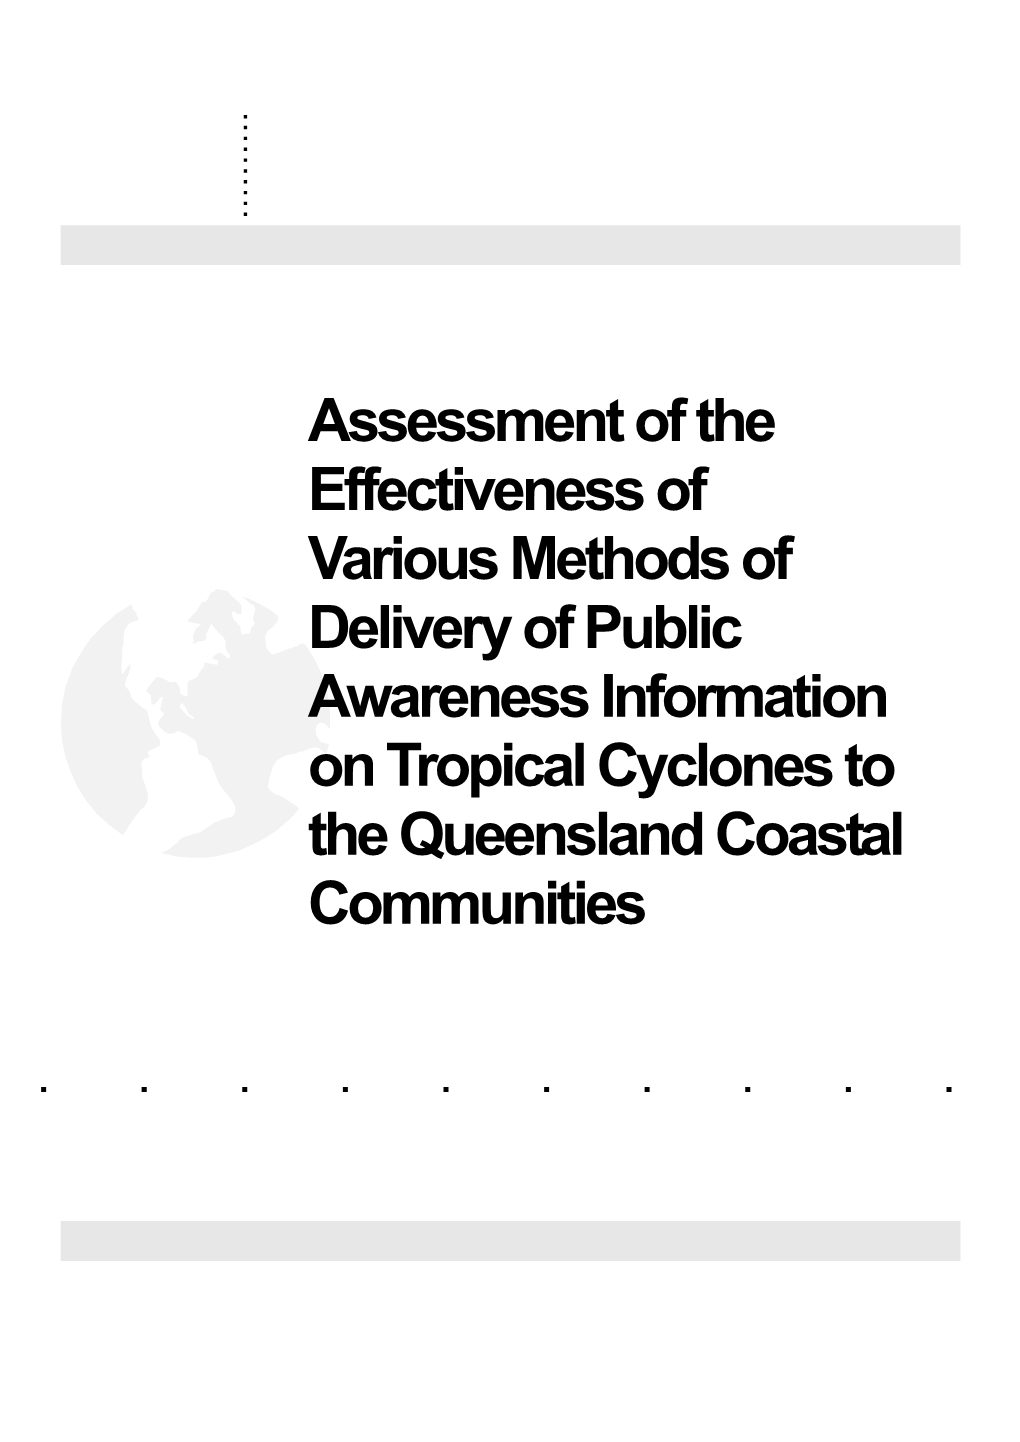 Assessment of the Effectiveness of Various Methods of Delivery of Public Awareness Information on Tropical Cyclones to the Queensland Coastal Communities